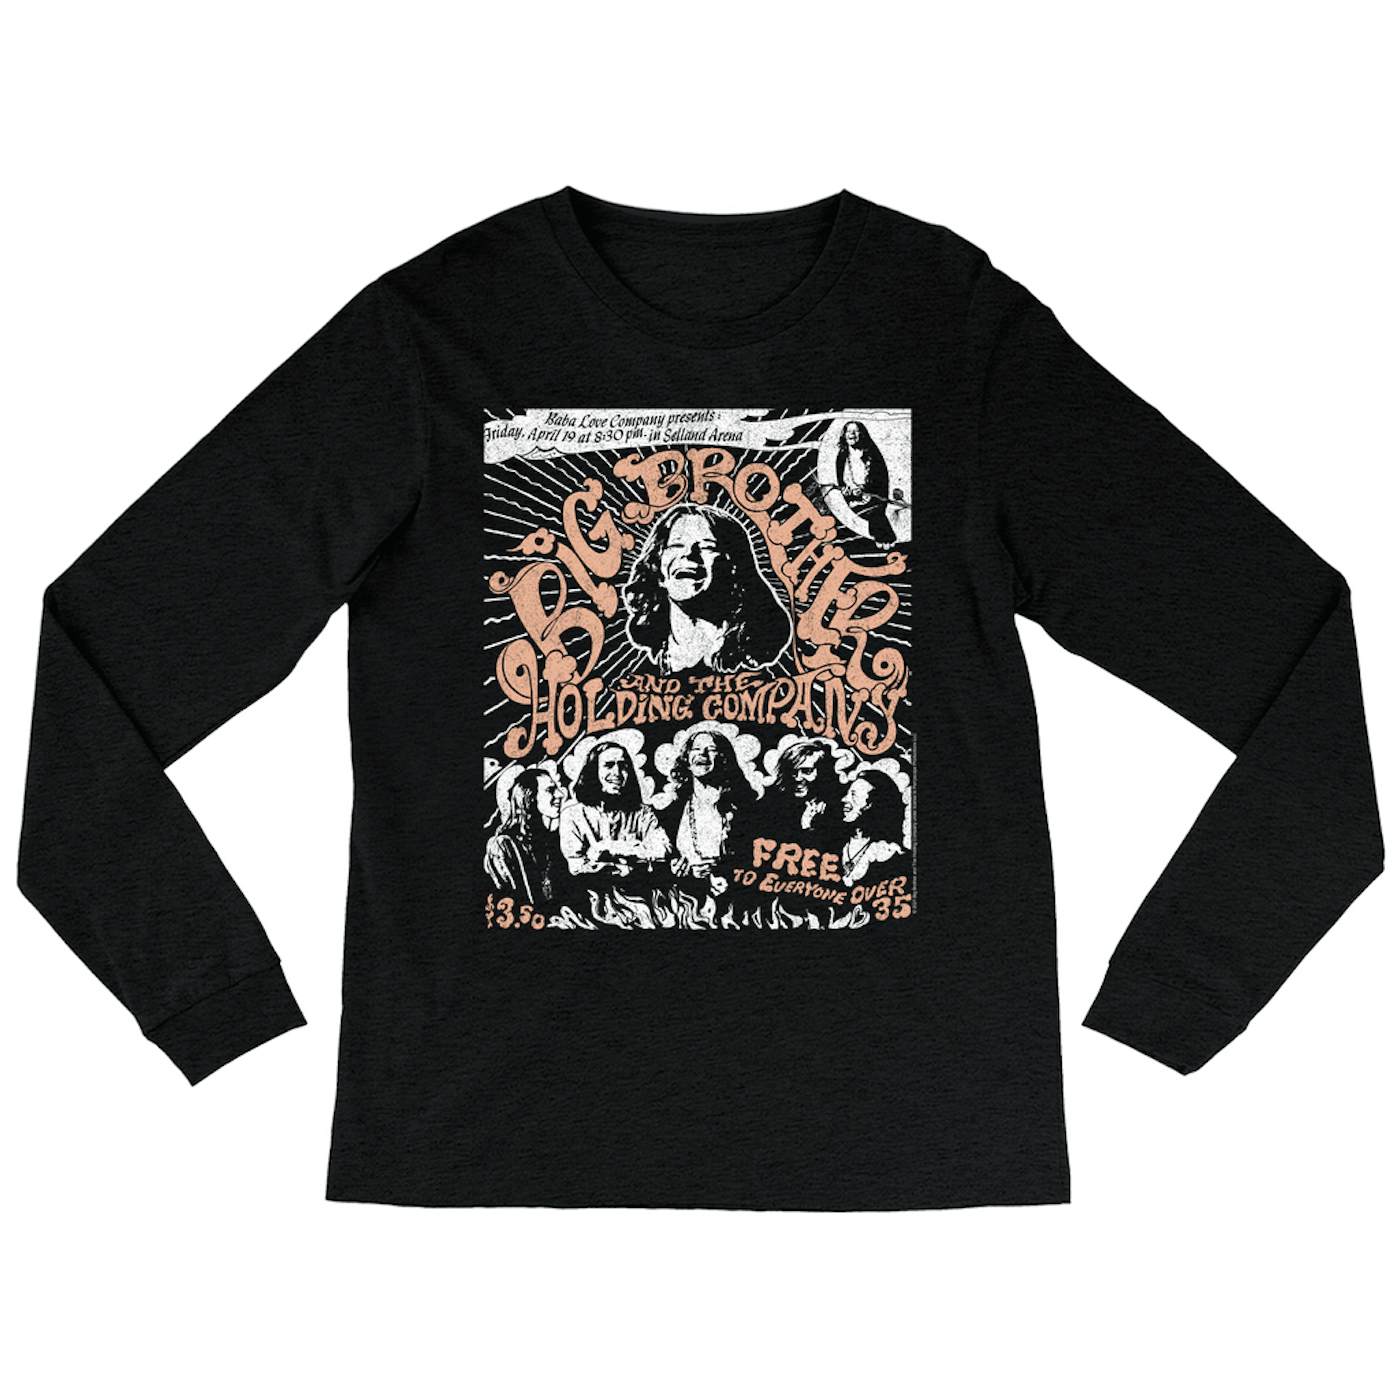 Big Brother & The Holding Company Big Brother and The Holding Co. Heather Long Sleeve Shirt | Featuring Janis Joplin Fresno Concert Flyer Big Brother and The Holding Co. Shirt